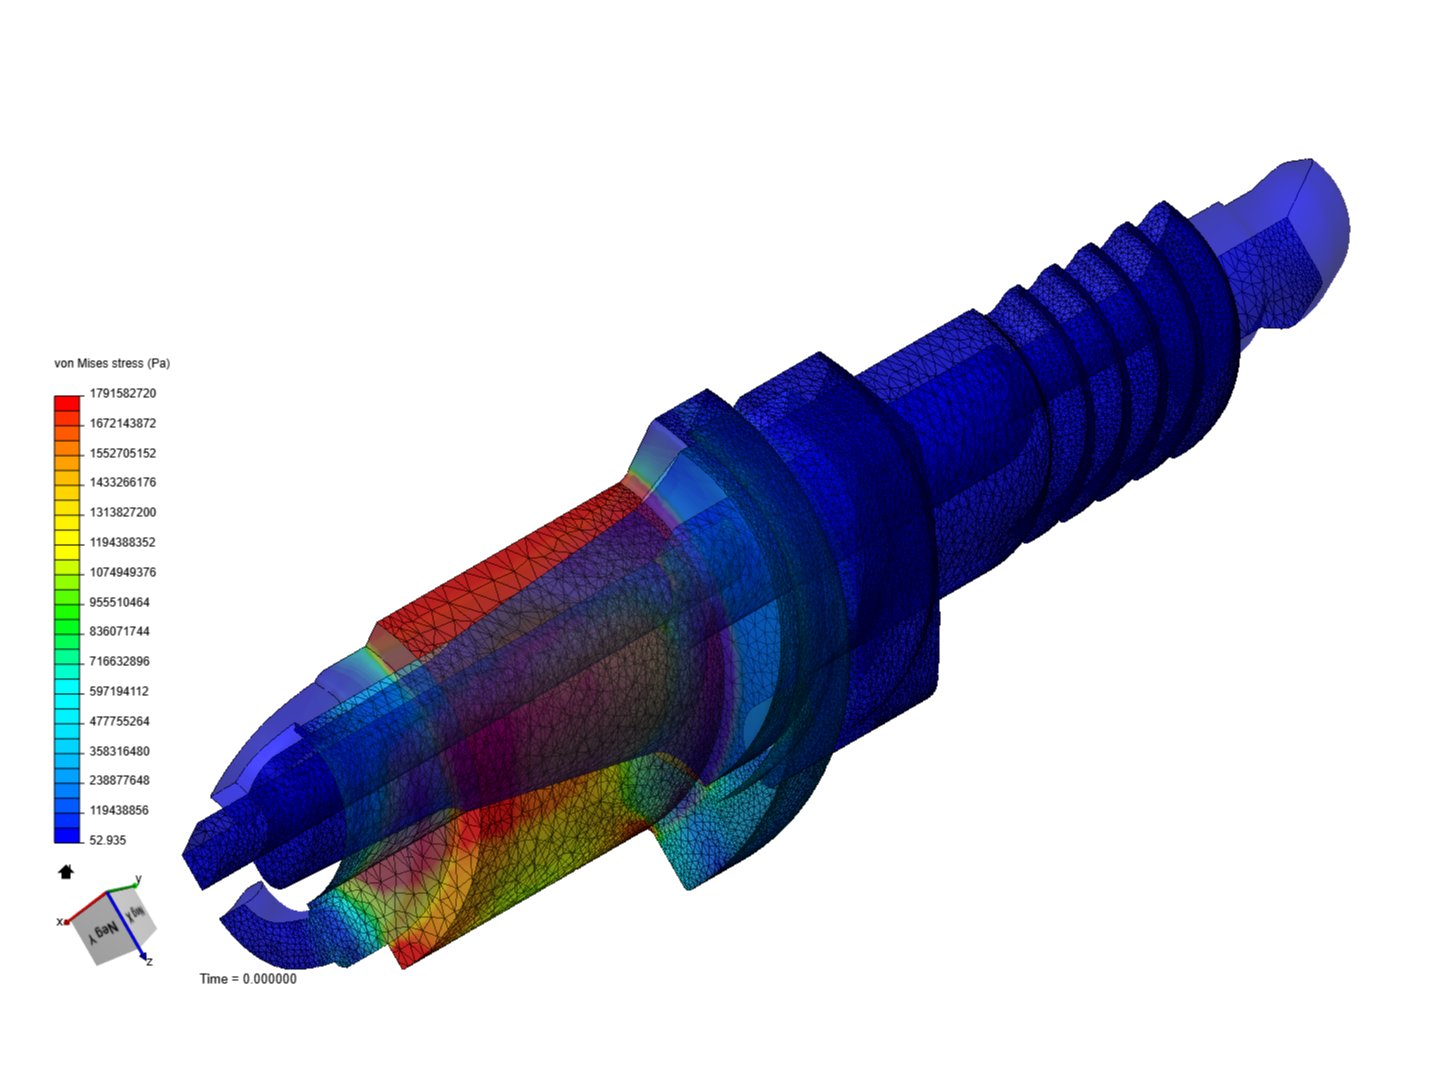 professional_training-_thermal_structural_analysis_of_a_steam_stop_valve image